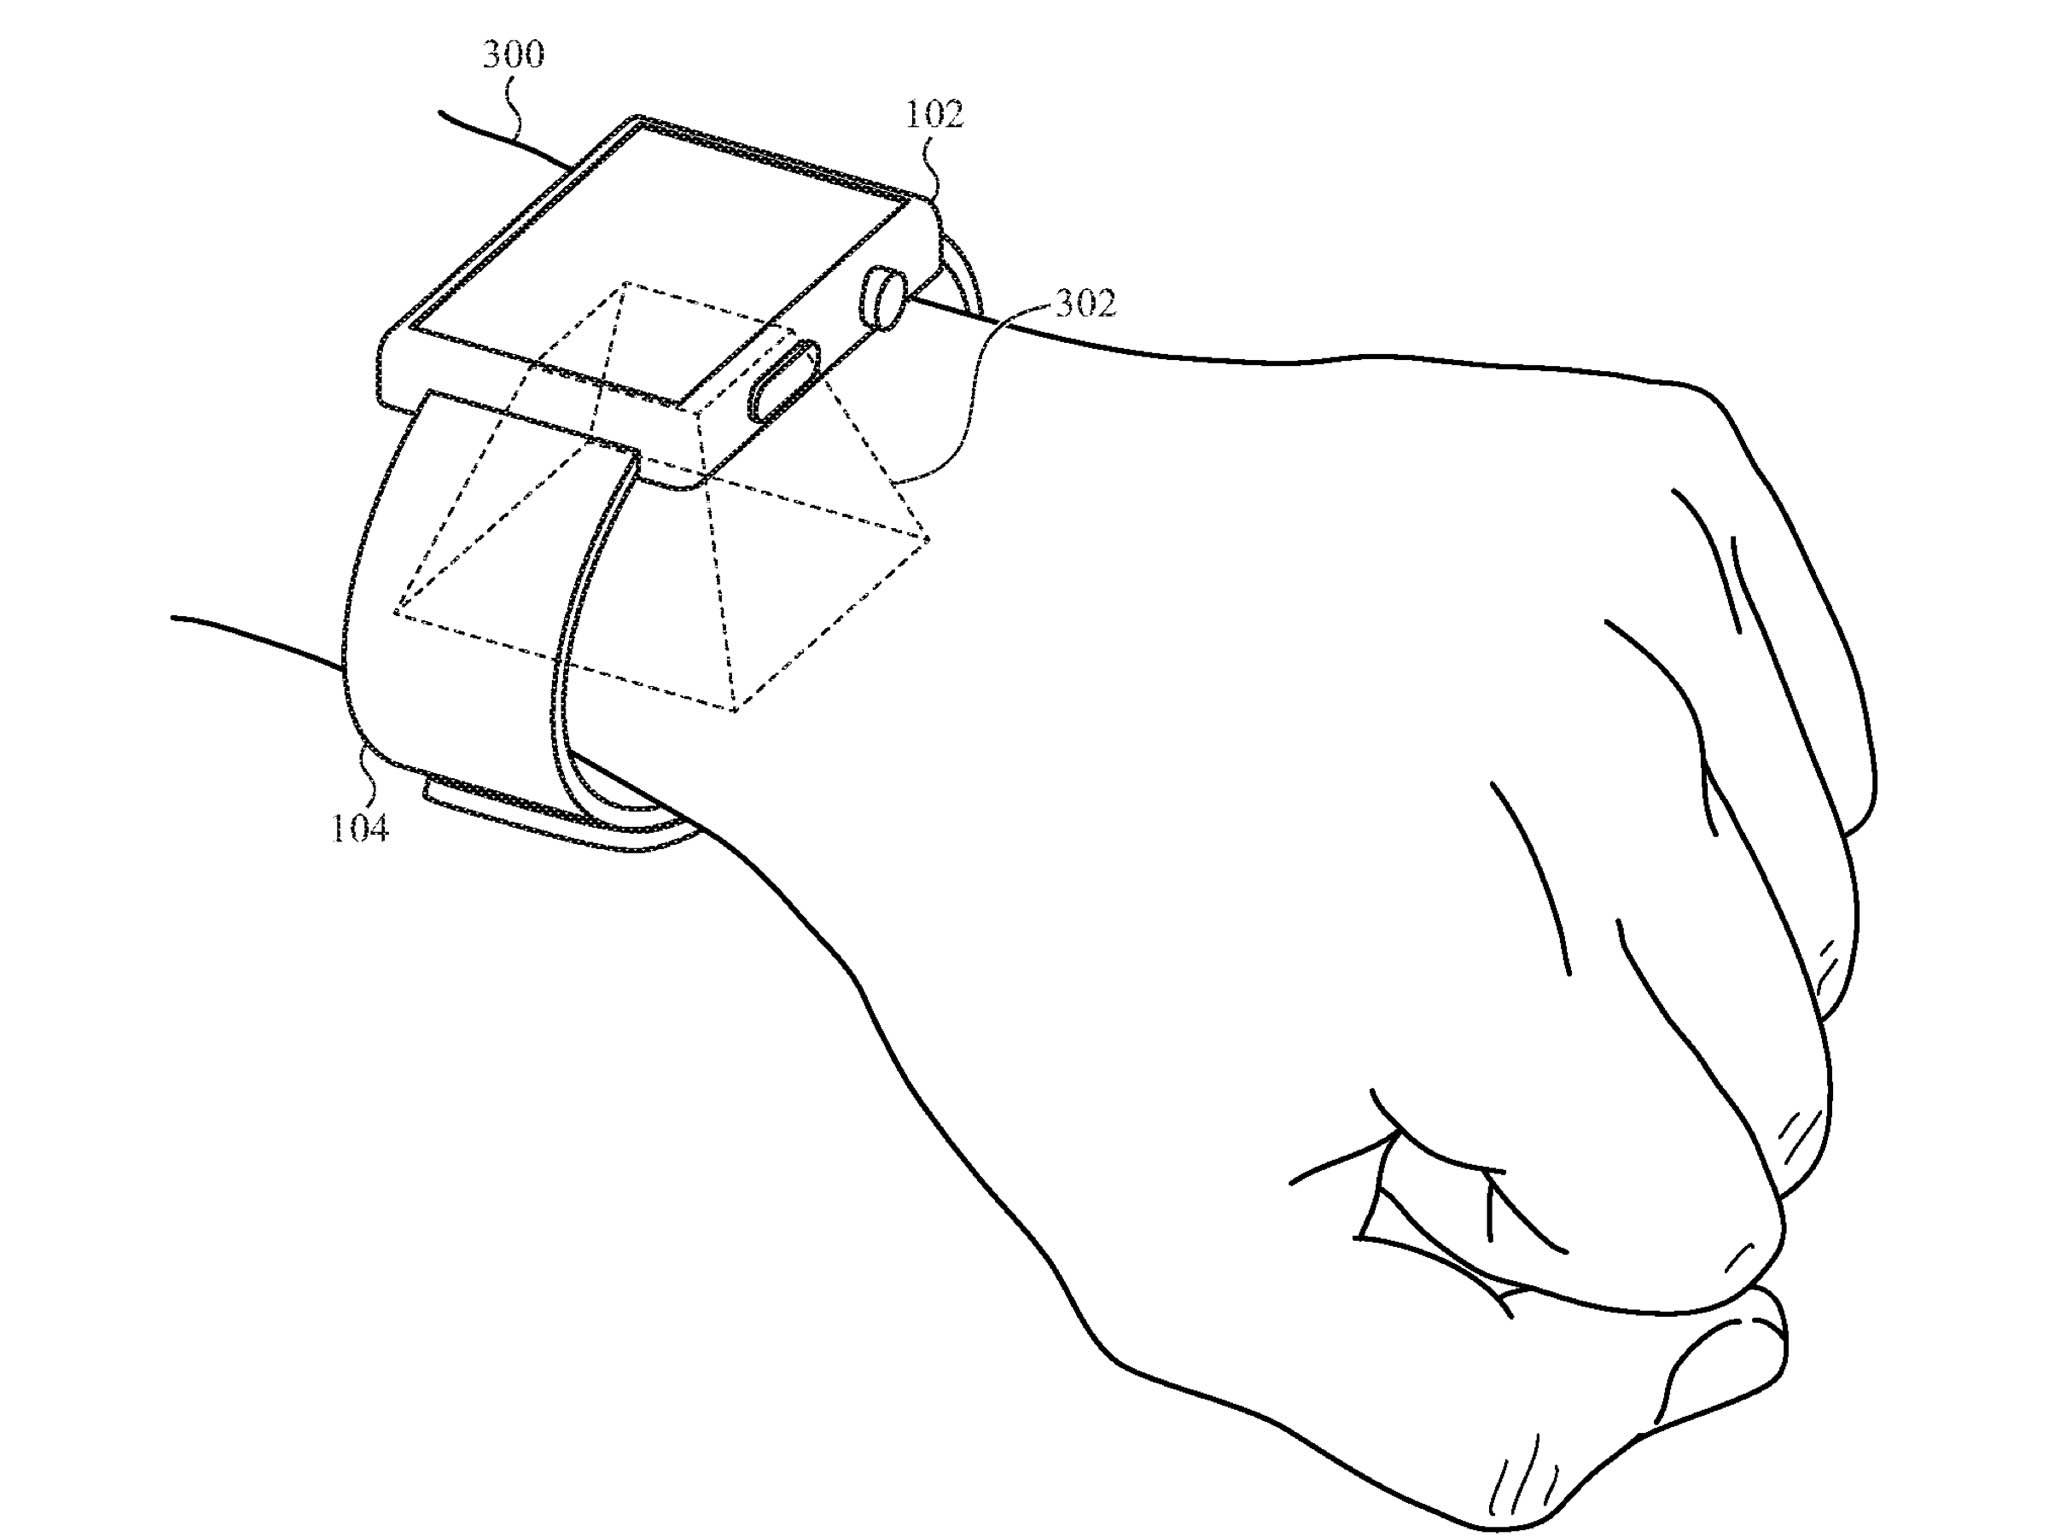 A drawing accompanying Apple's patent application for a Wrist ID authentication system for Apple Watch